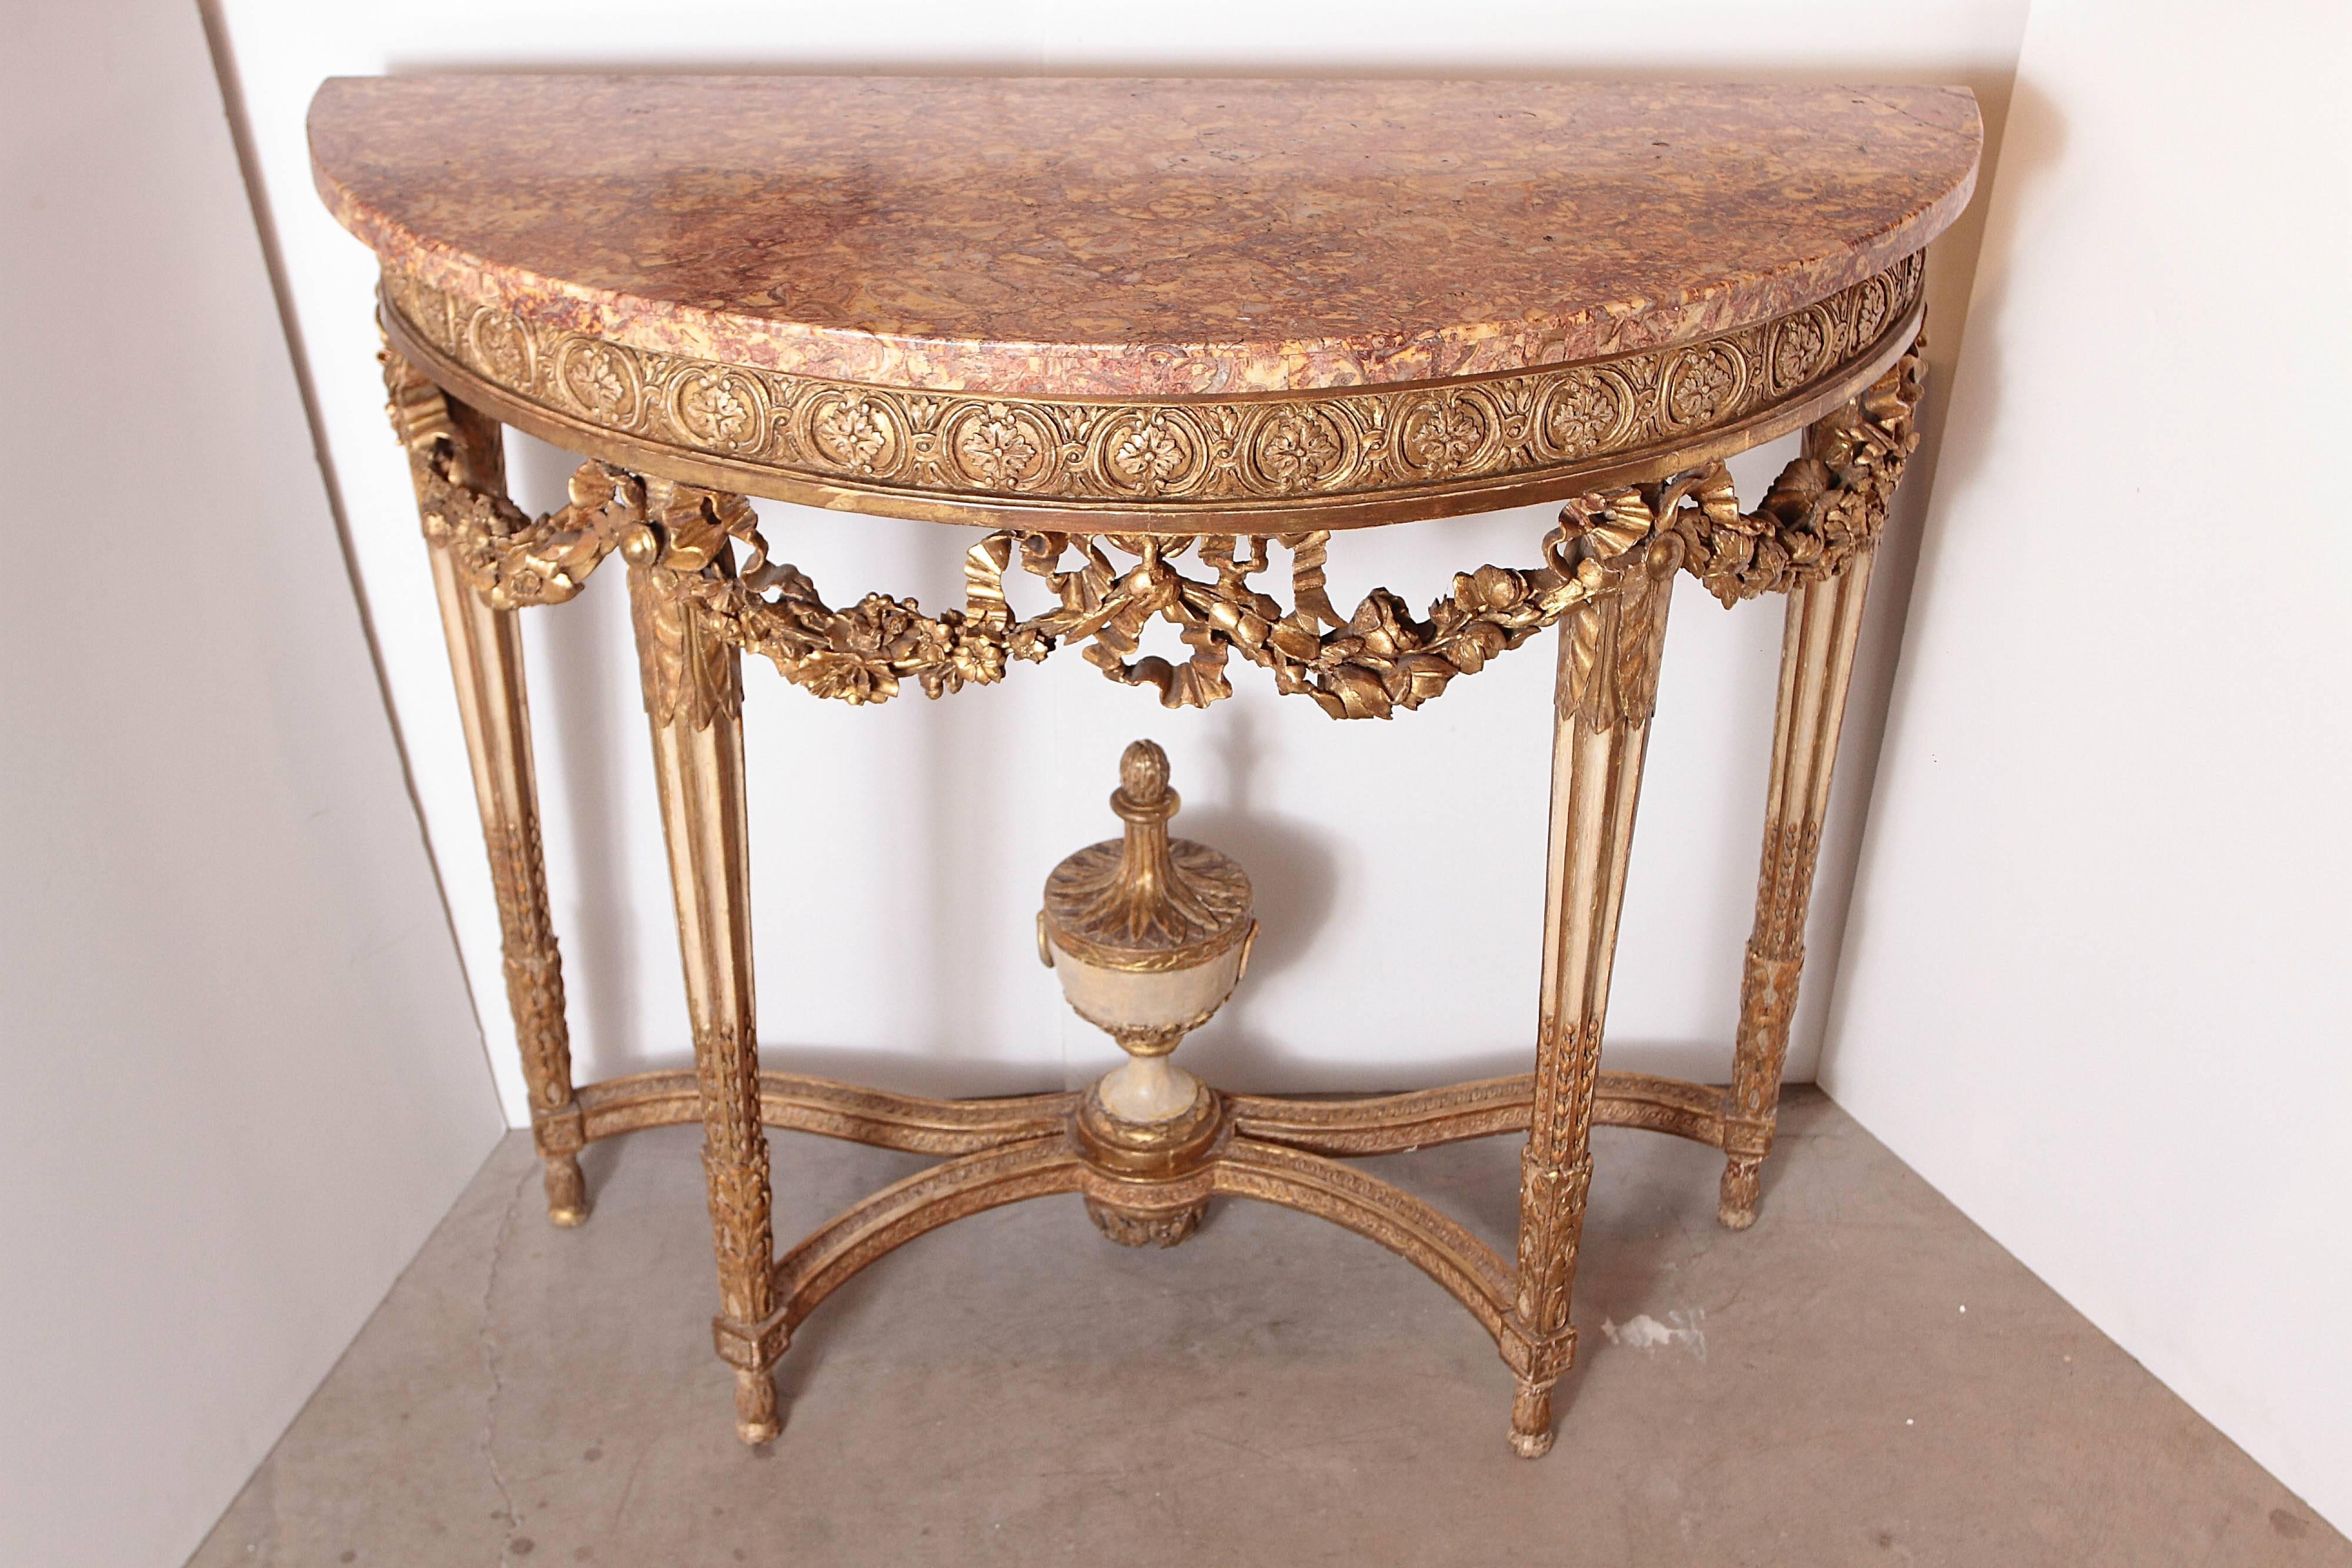 Pair of French Louis XVI gilt carved and cream painted Louis XVI marble top consoles .Gilt carved swag detail with leaves and floral designs.